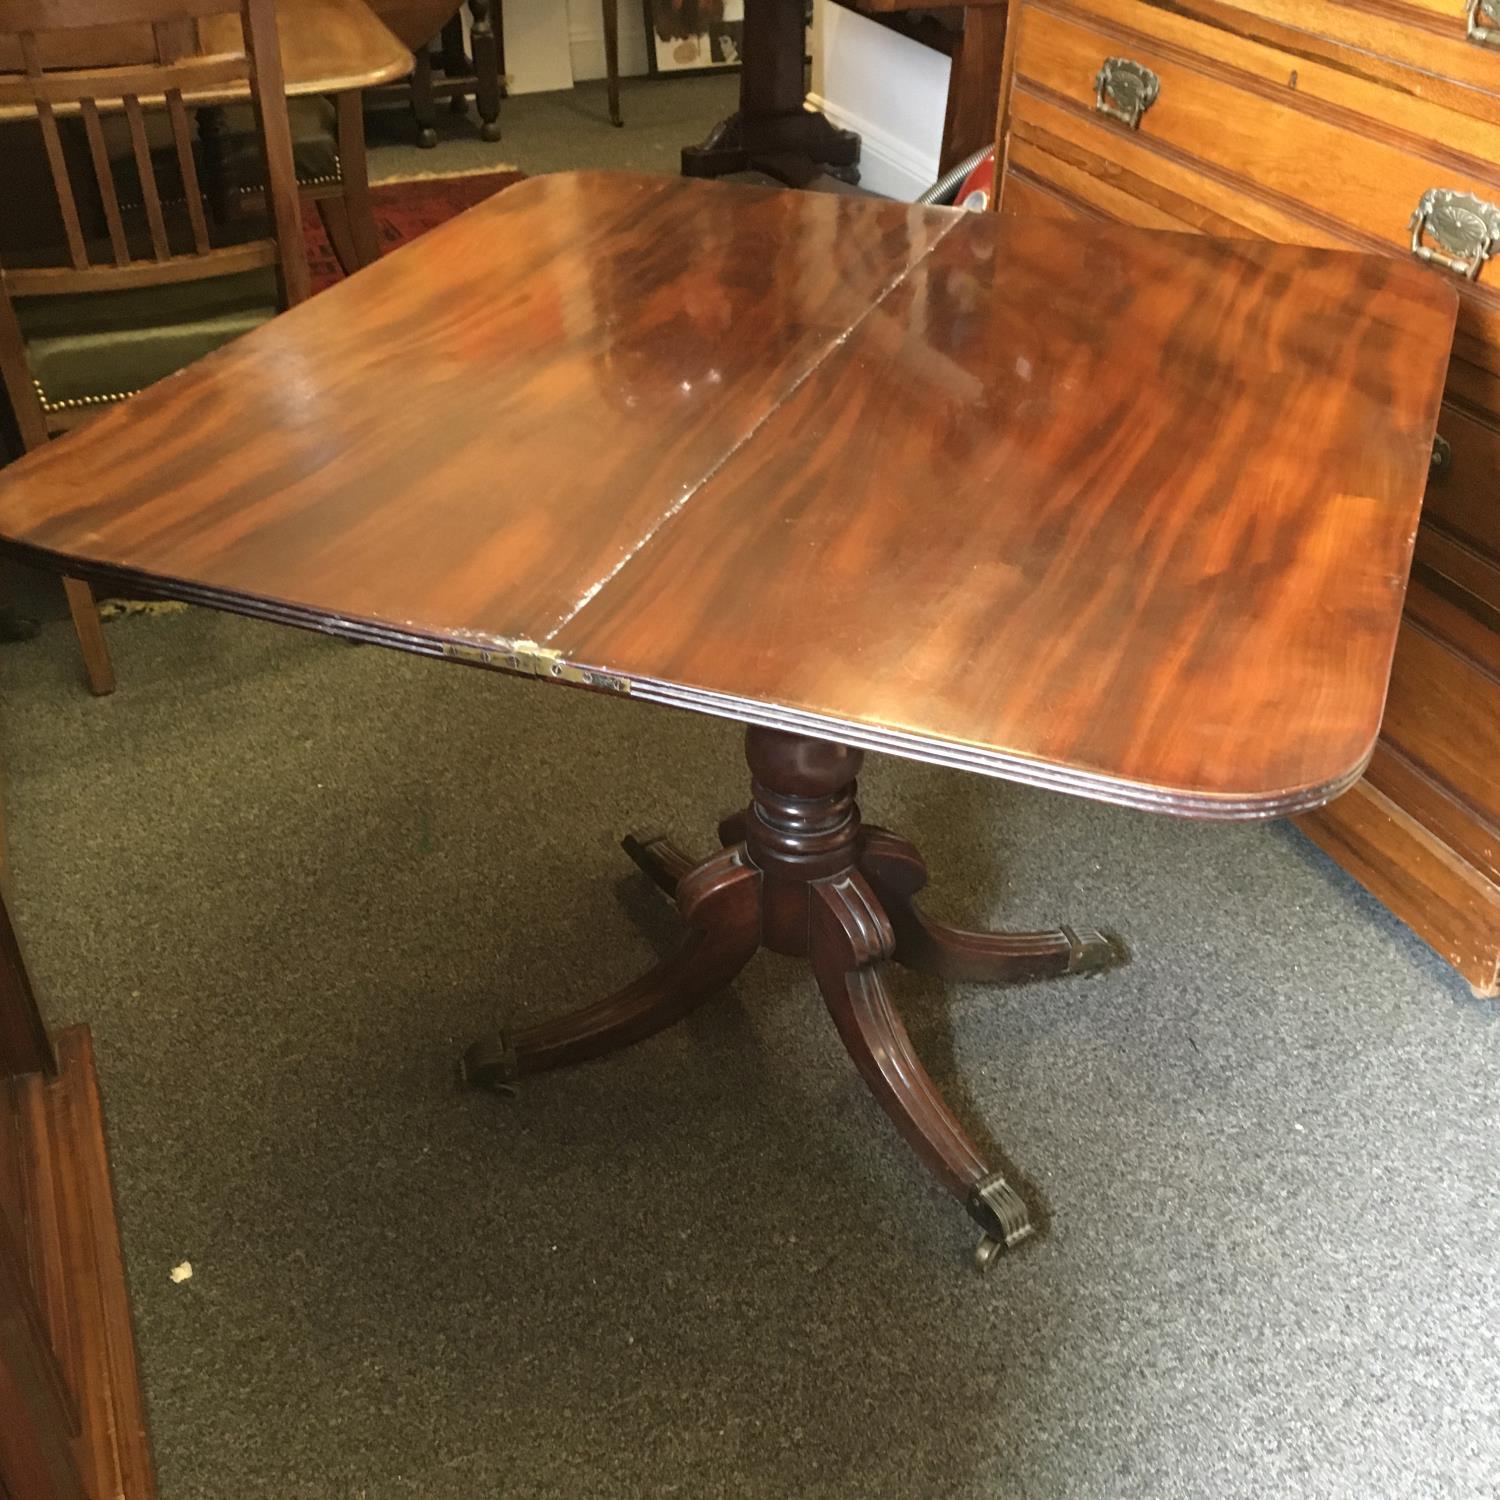 Regency period mahogany tea table with swivel action top revealing storage area below on 4 down - Image 2 of 3